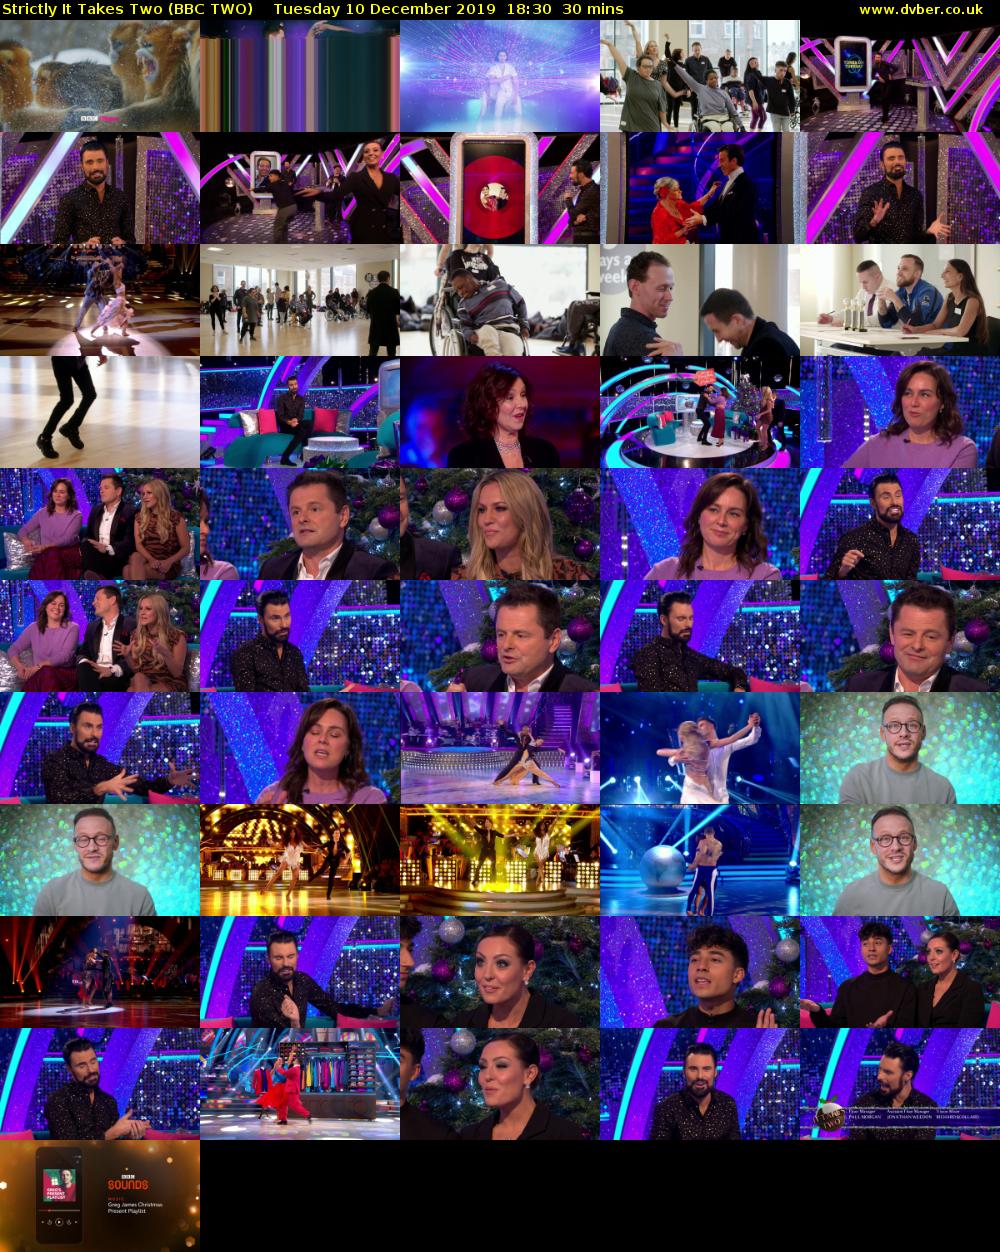 Strictly It Takes Two (BBC TWO) Tuesday 10 December 2019 18:30 - 19:00